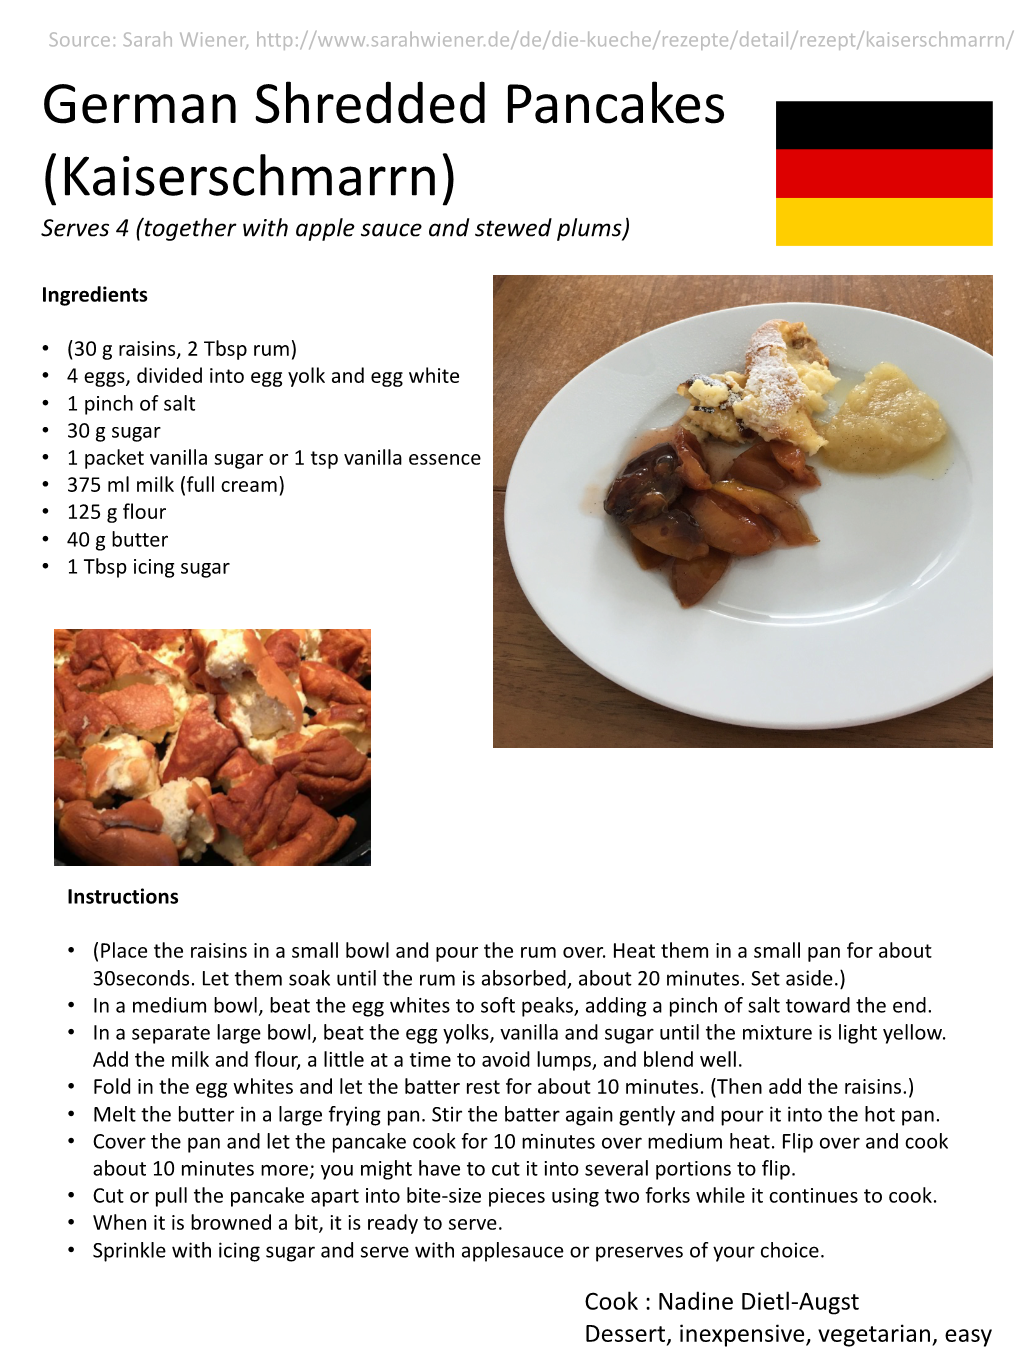 German Shredded Pancakes (Kaiserschmarrn) Serves 4 (Together with Apple Sauce and Stewed Plums)